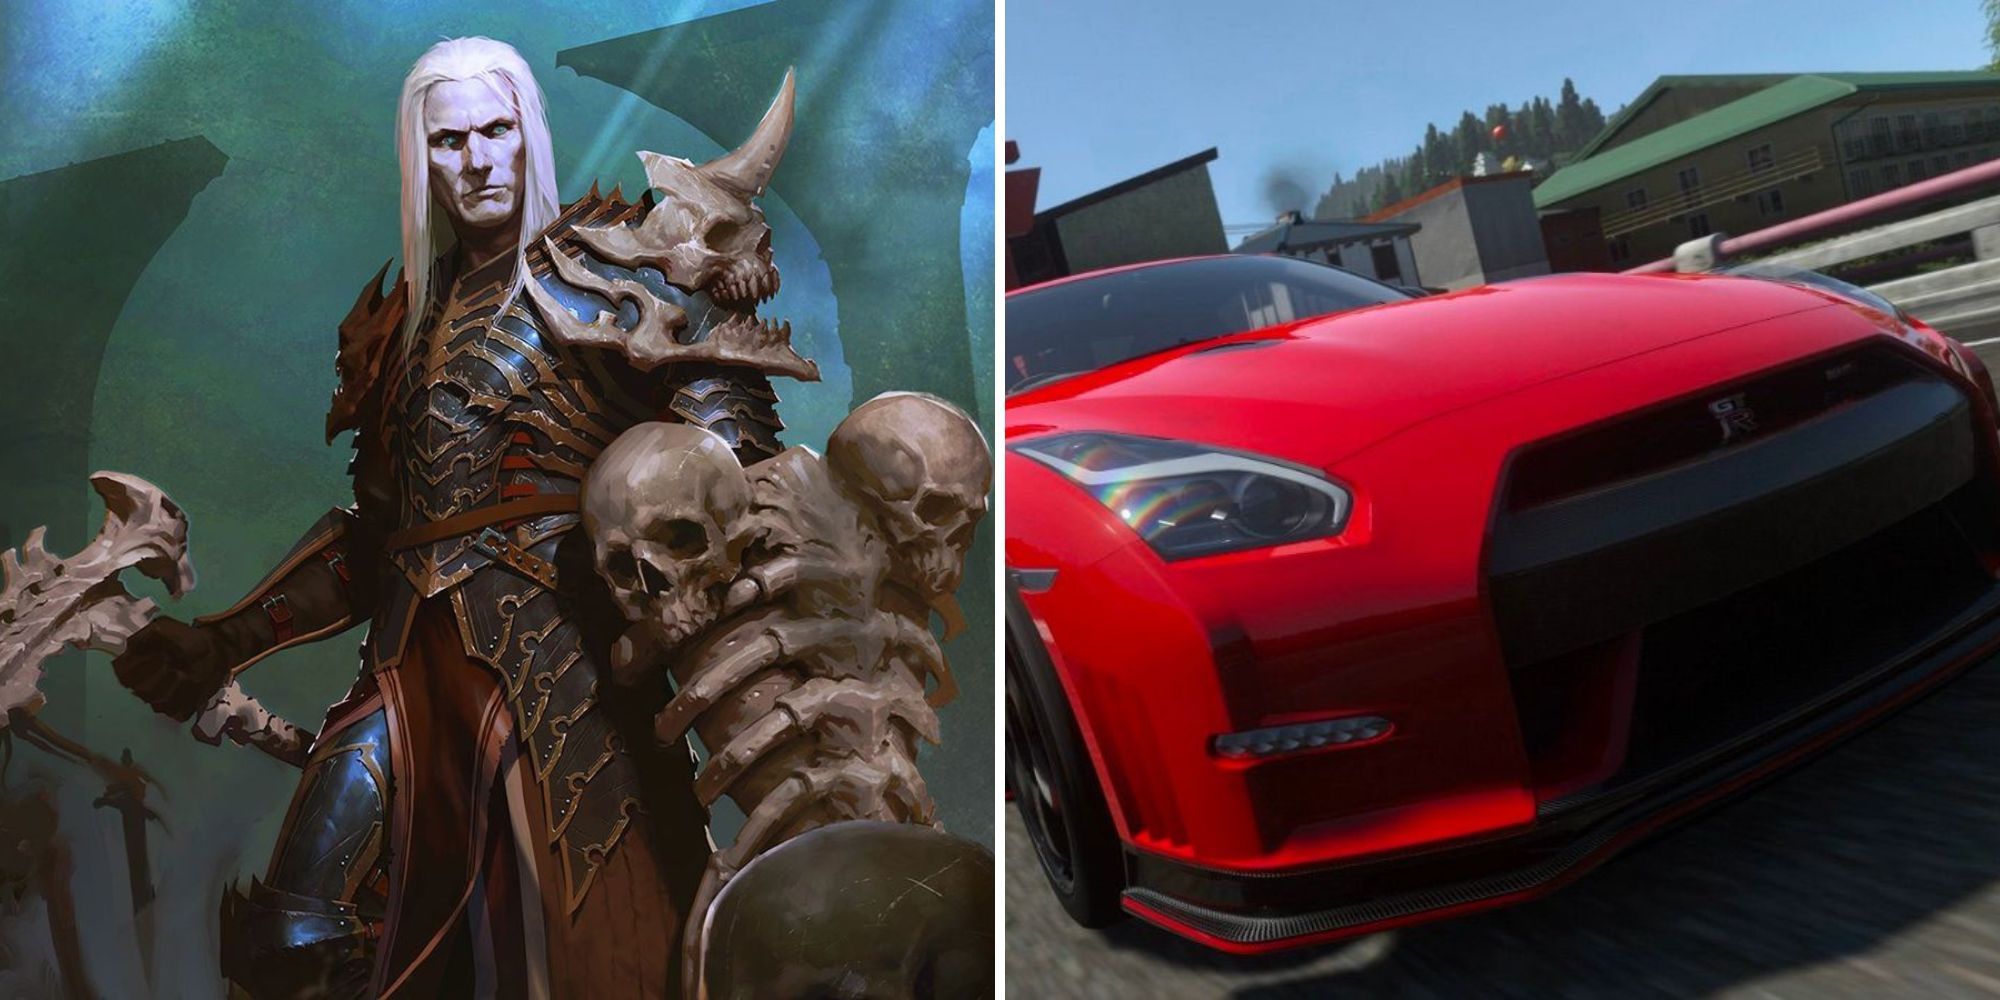 A picture of a necromancer from Diablo 3 and a red car from Driveclub